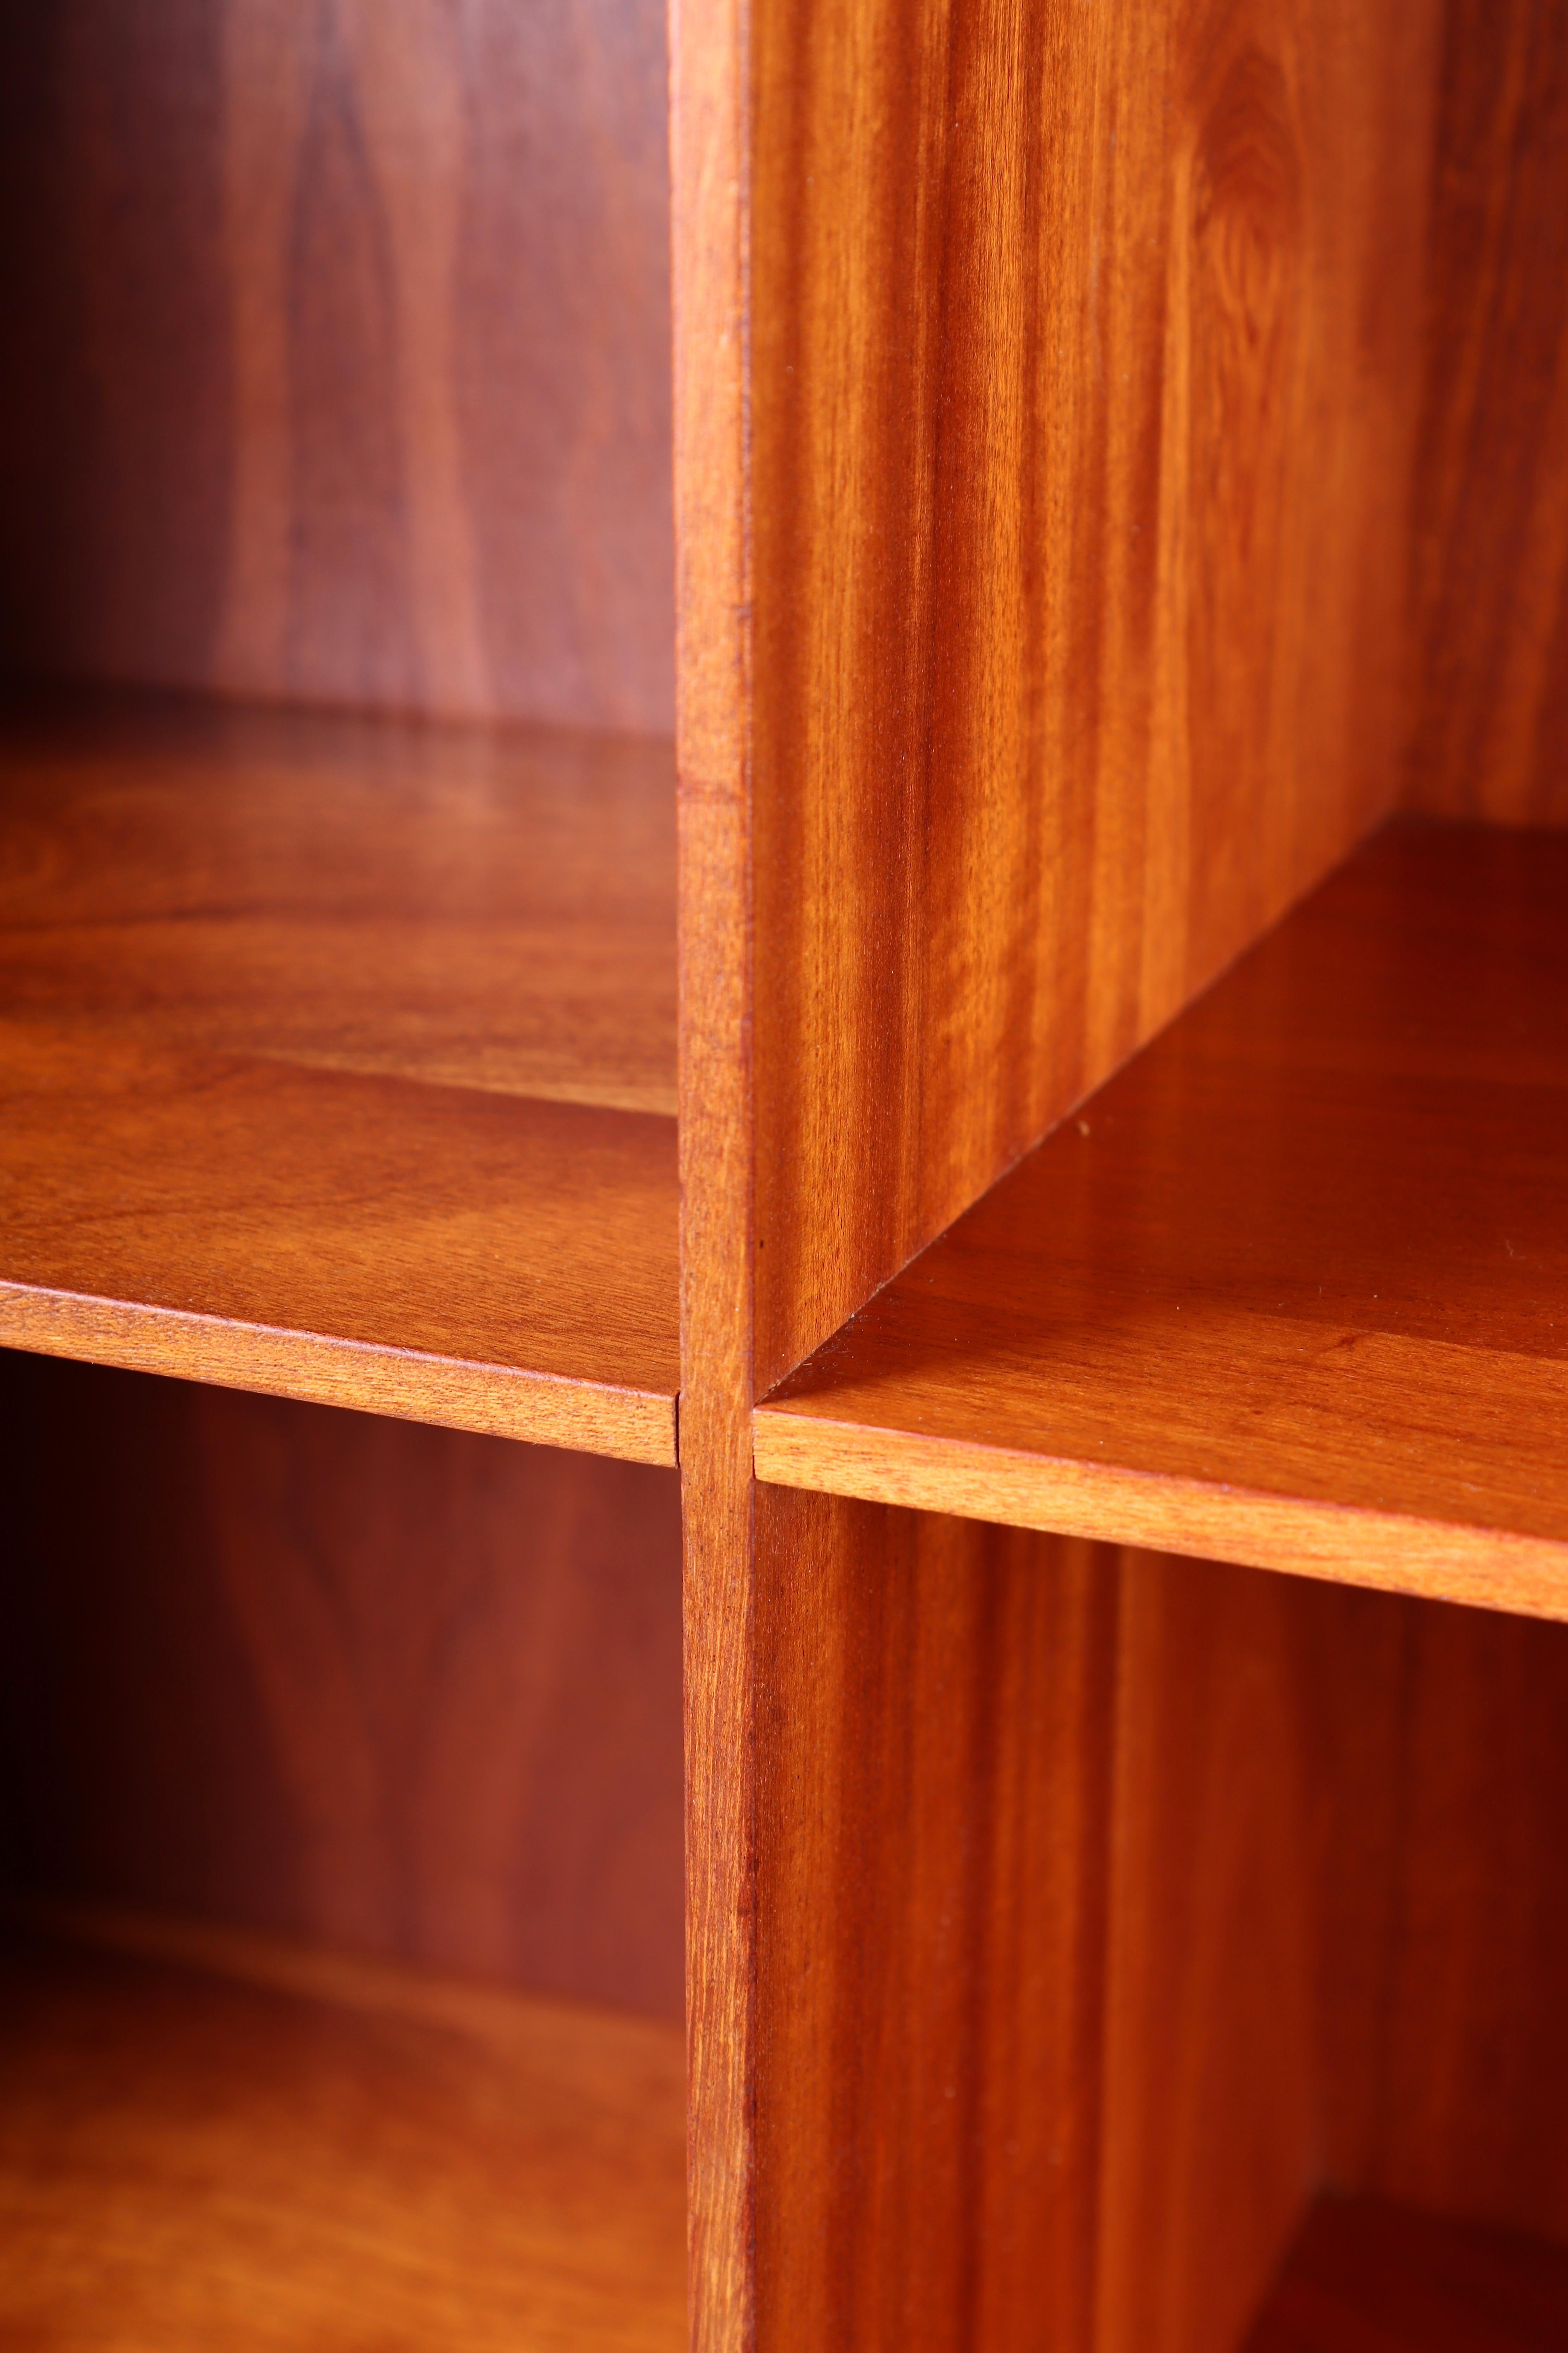 Pair of bookcases in solid mahogany designed by Mogens Koch for Rud. Rasmussen cabinetmakers in 1933. Made in Denmark and in all original condition.
Each bookcase is D 28cm, W 76, H 82 with base, 76 without base.